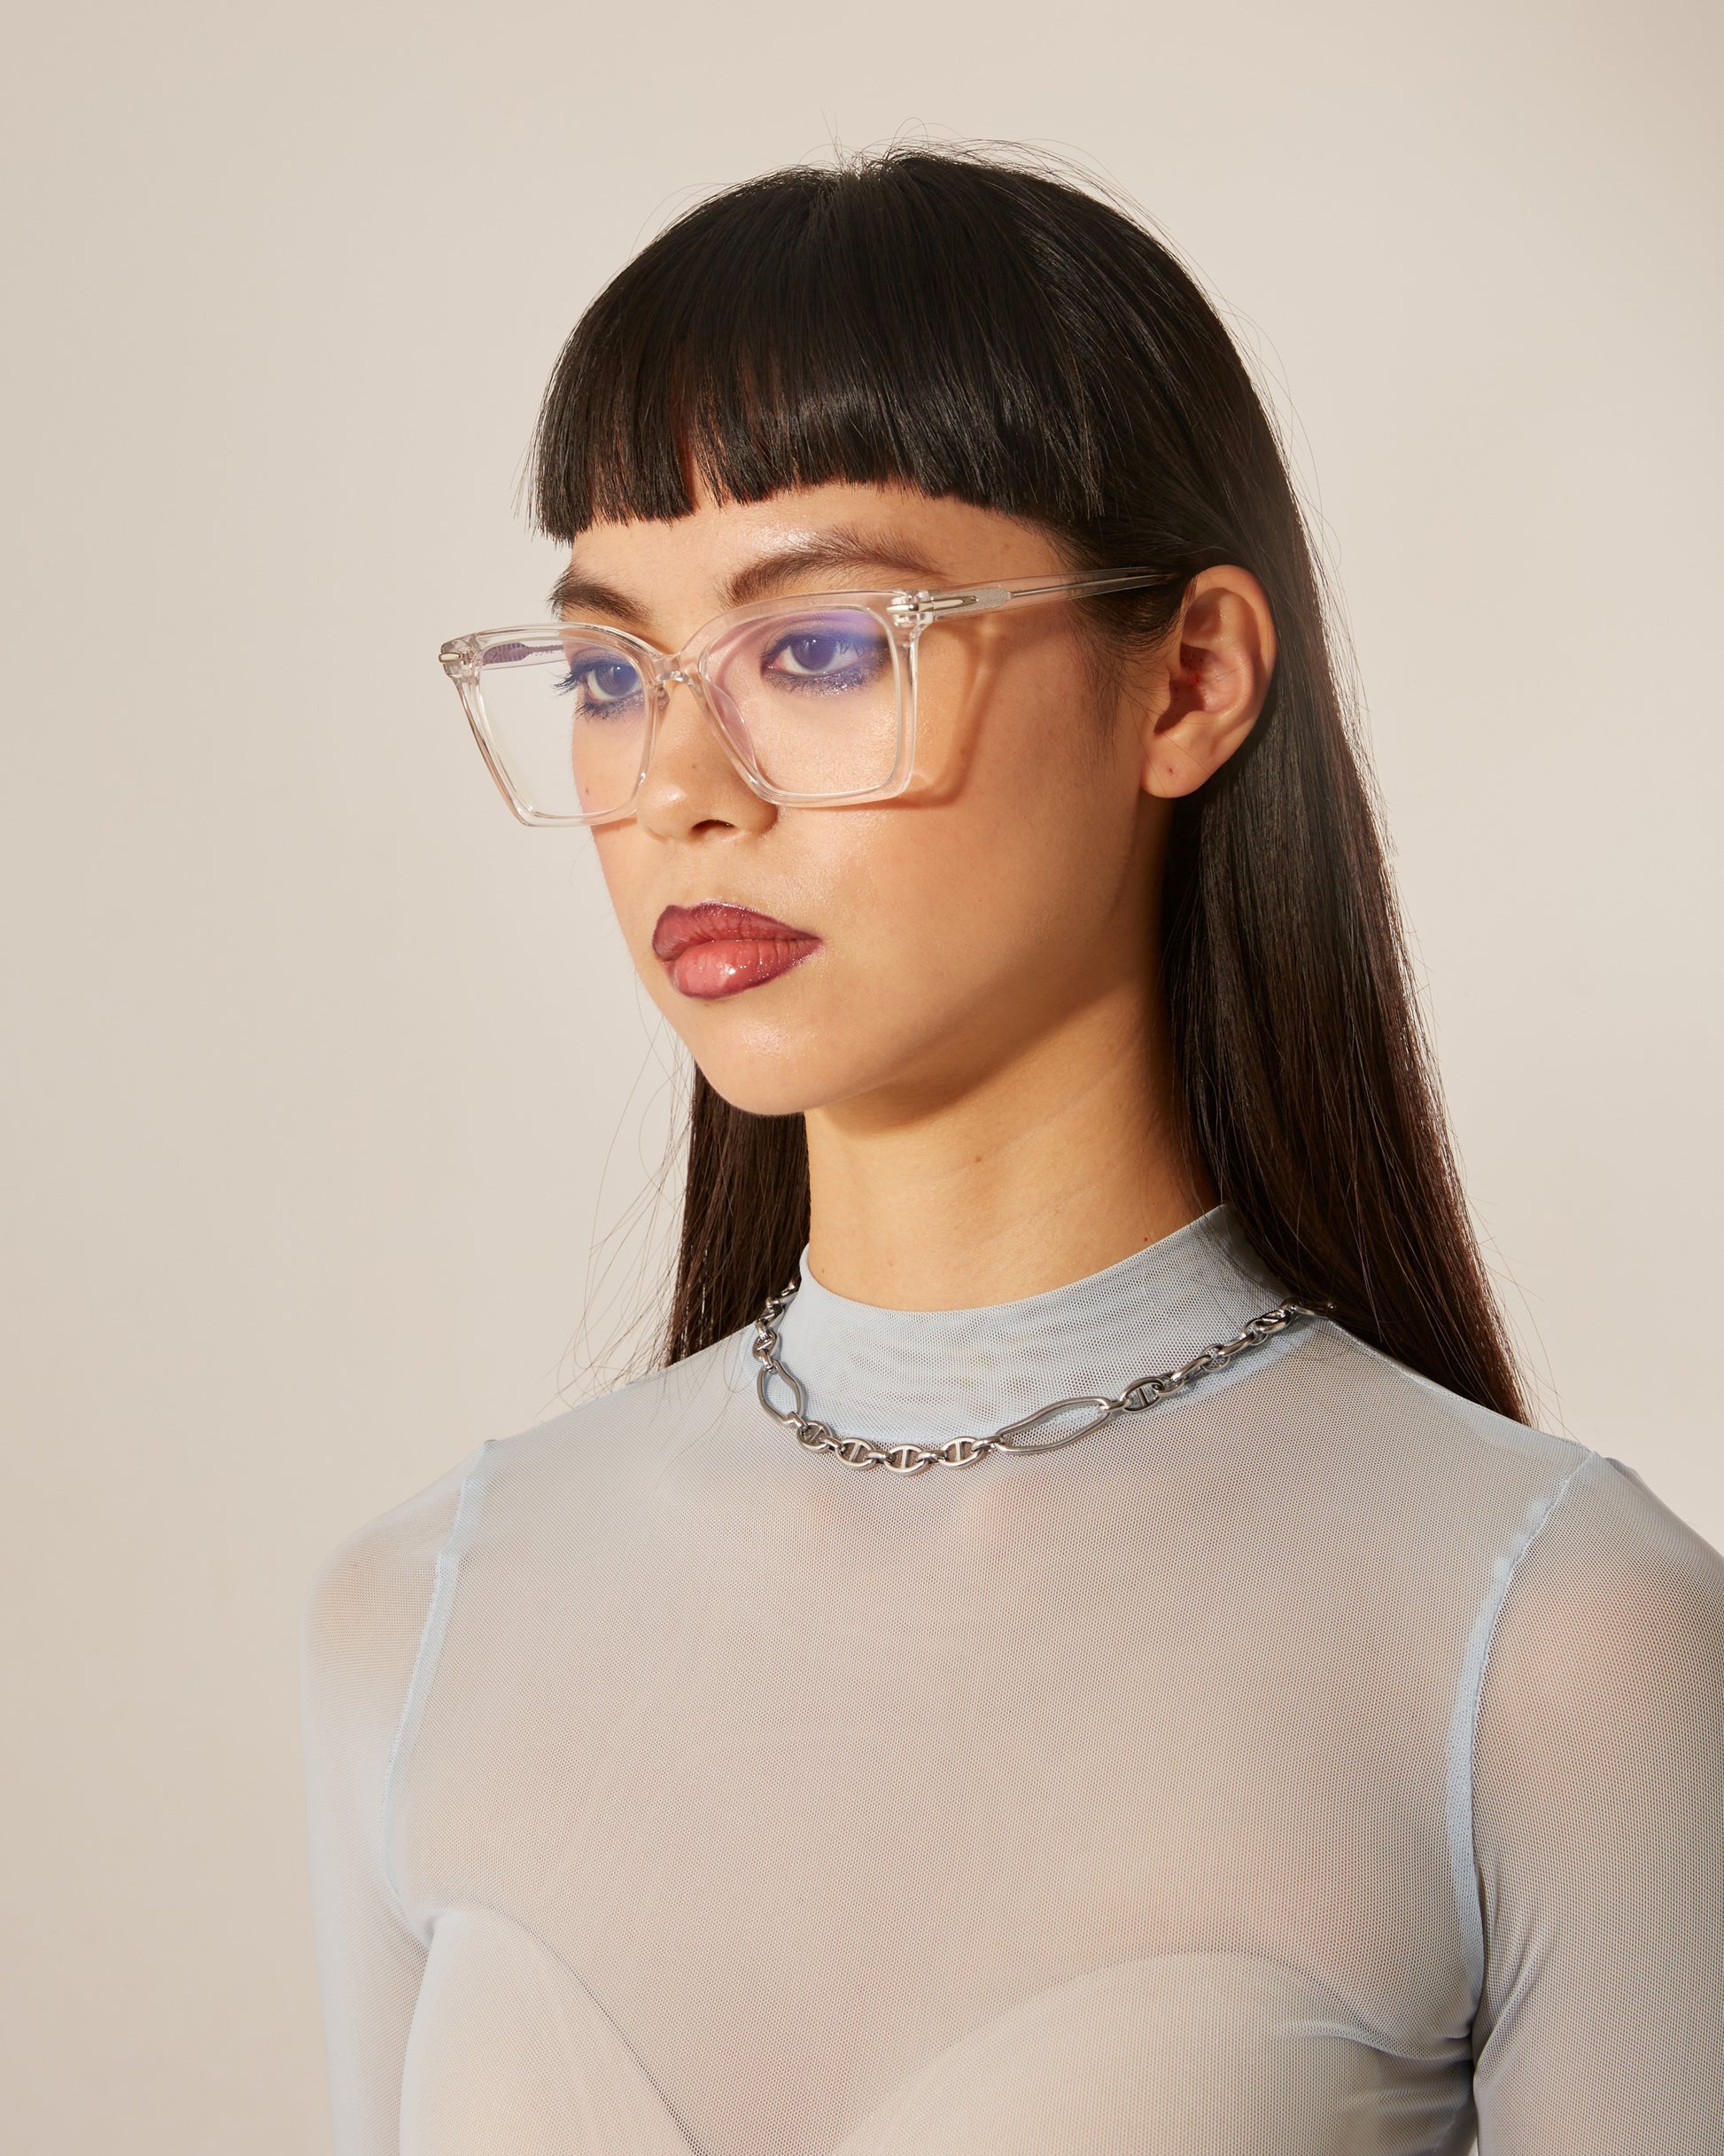 A woman with straight black hair and clear-frame optical glasses, wearing a sheer, ribbed top and a chain necklace.